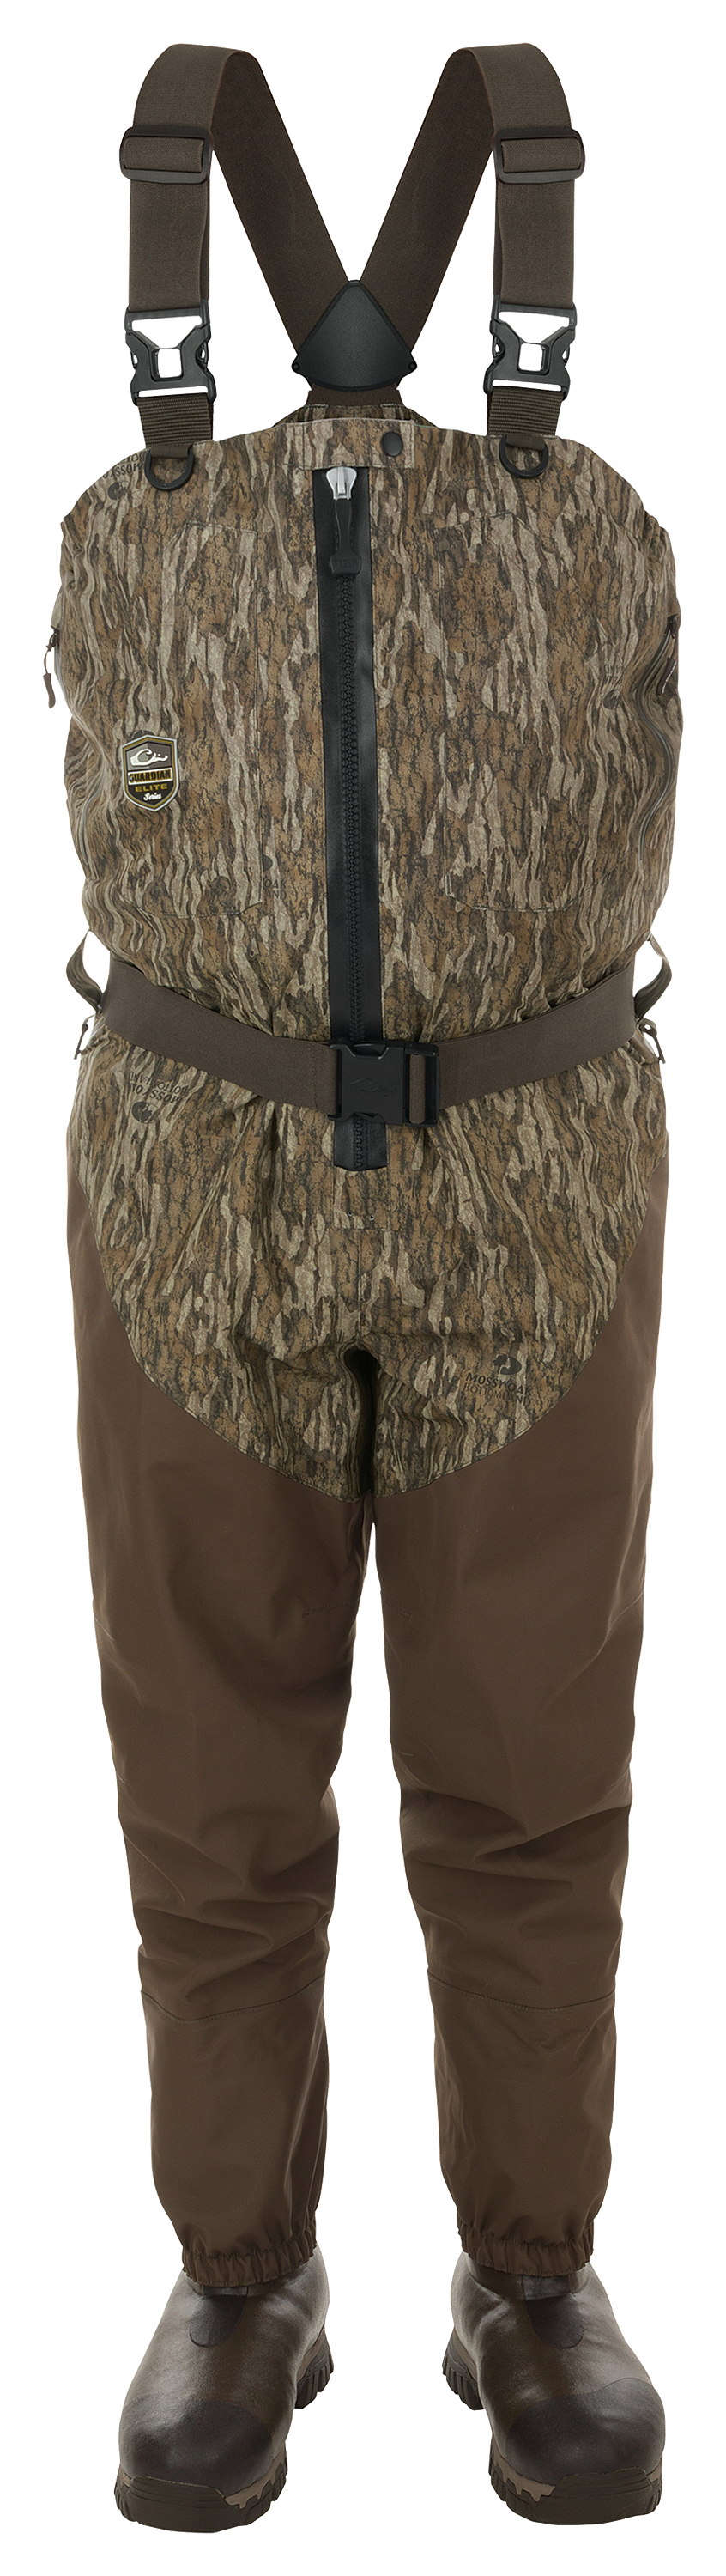 Drake Waterfowl Systems Guardian Elite Front Zip Breathable Waders for Men - Mossy Oak Bottomland - 14/XX Large